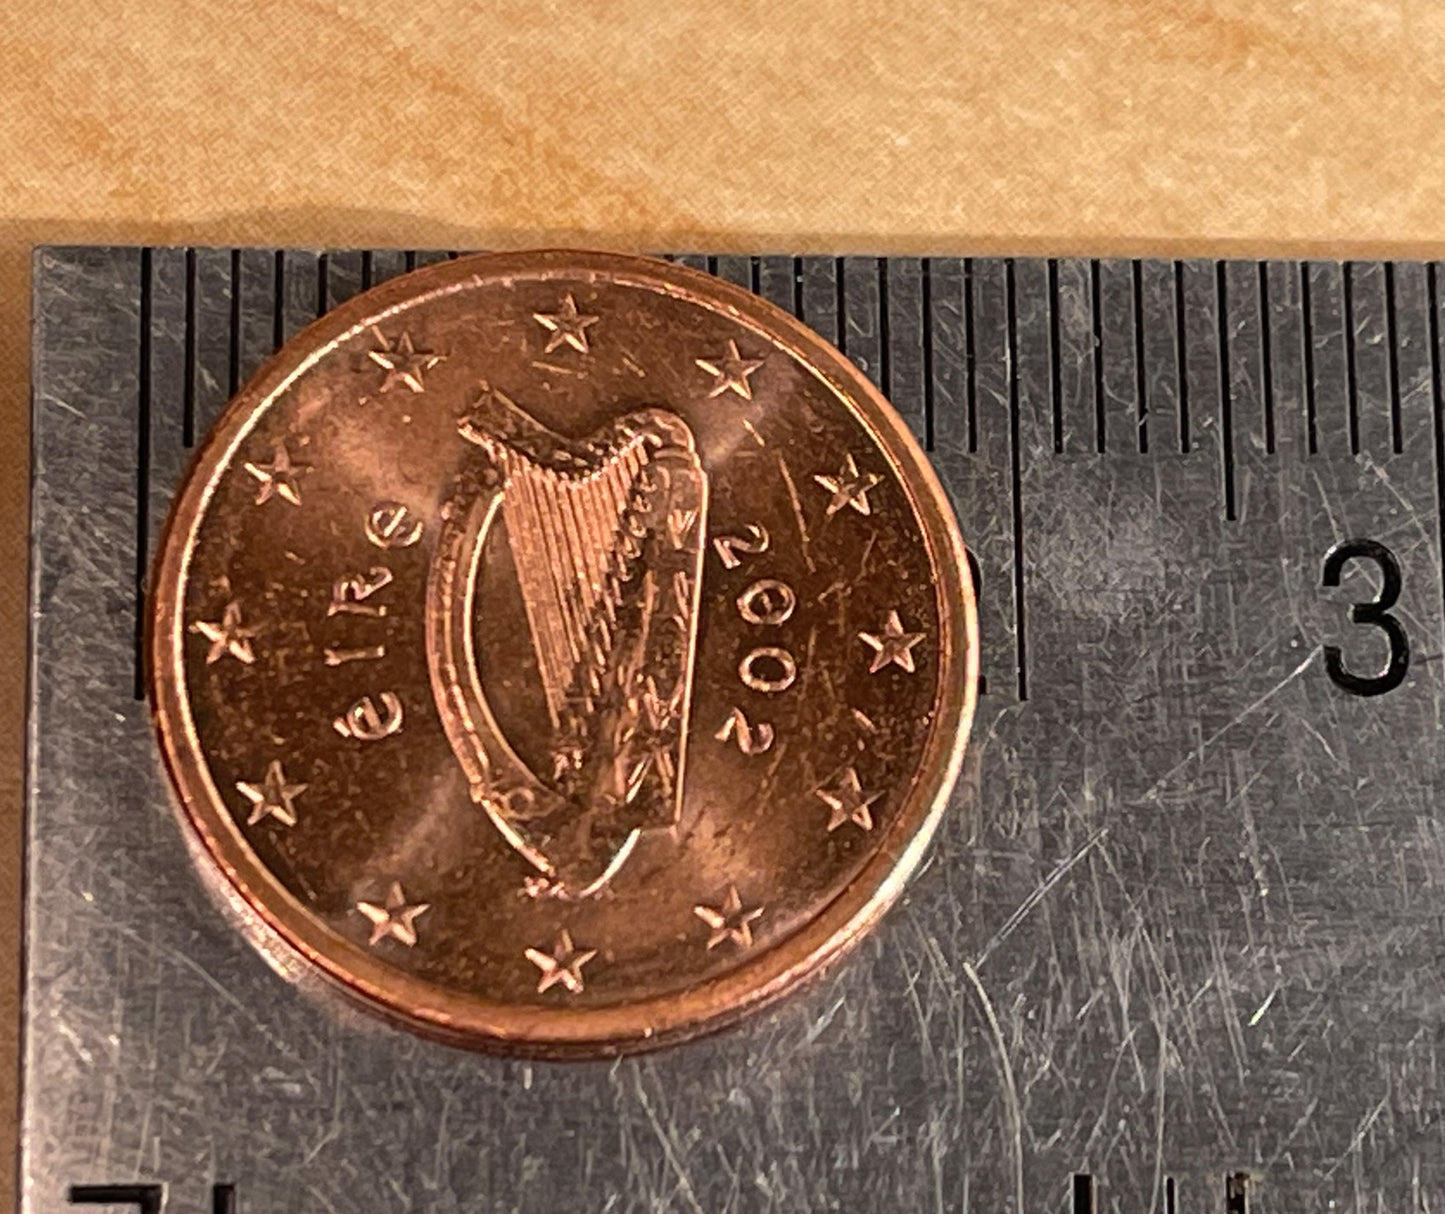 Irish Harp 2 Euro Cents Ireland Authentic Coin Money for Jewelry and Craft Making